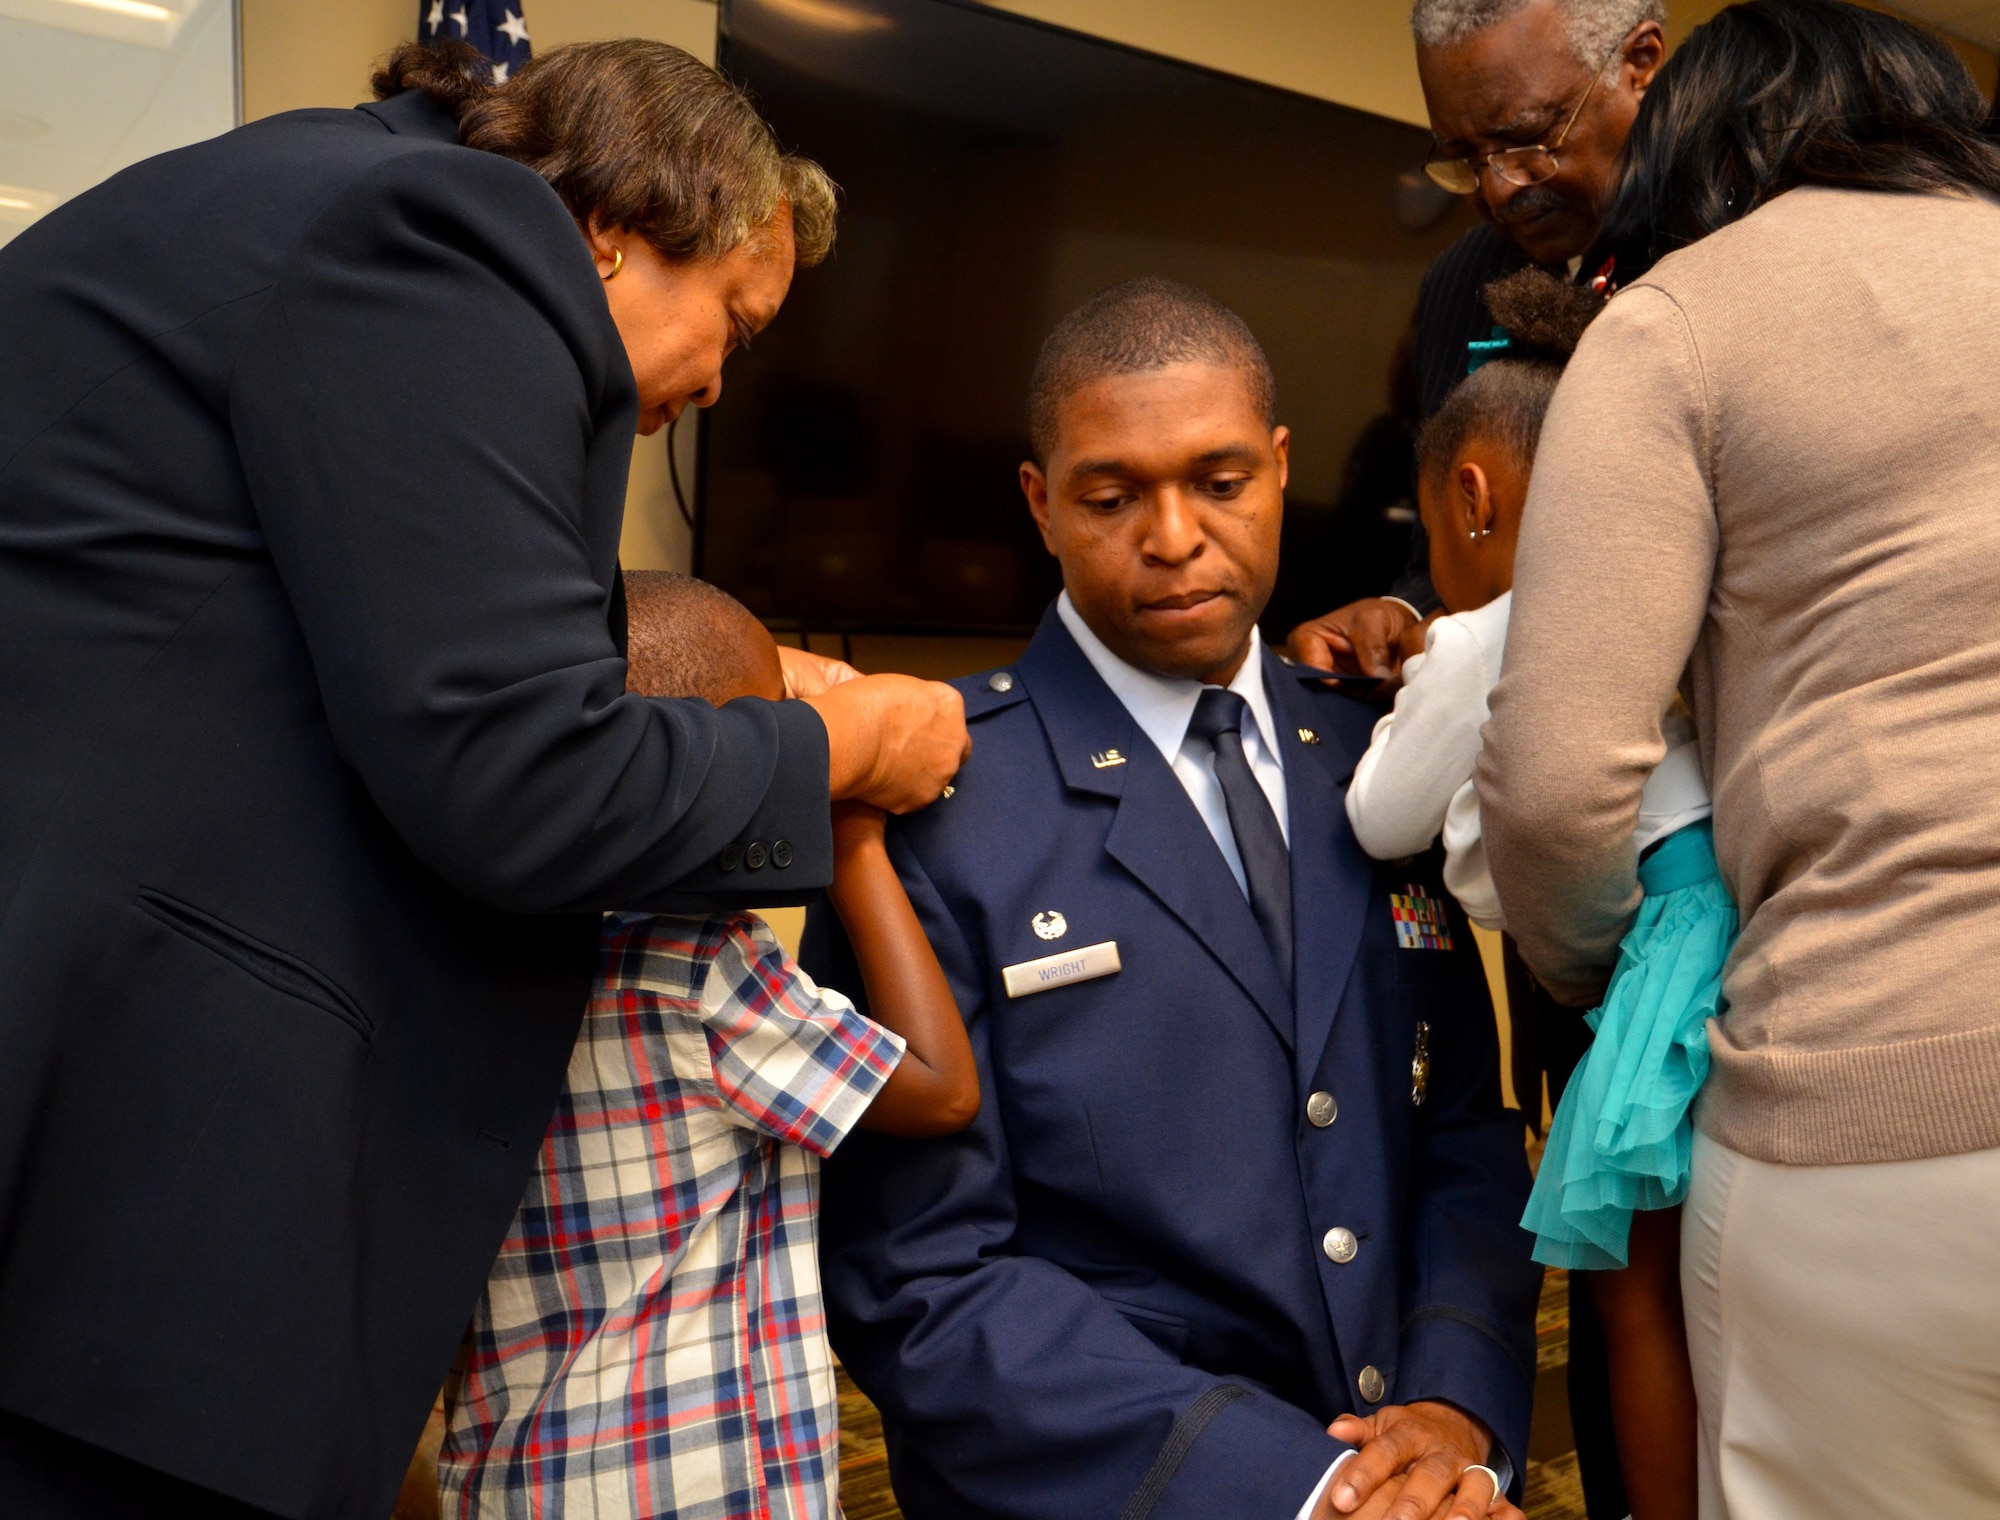 Lt. Col. Andre Wright, 94th Civil Engineer Squadron commander, is pinned by his family with his new rank during his ceremony of promotion at Dobbins Air Reserve Base on October 15, 2016. Wright spoke highly of his support system during the ceremony. (U.S. Air Force photo by Senior Airman Lauren Douglas)